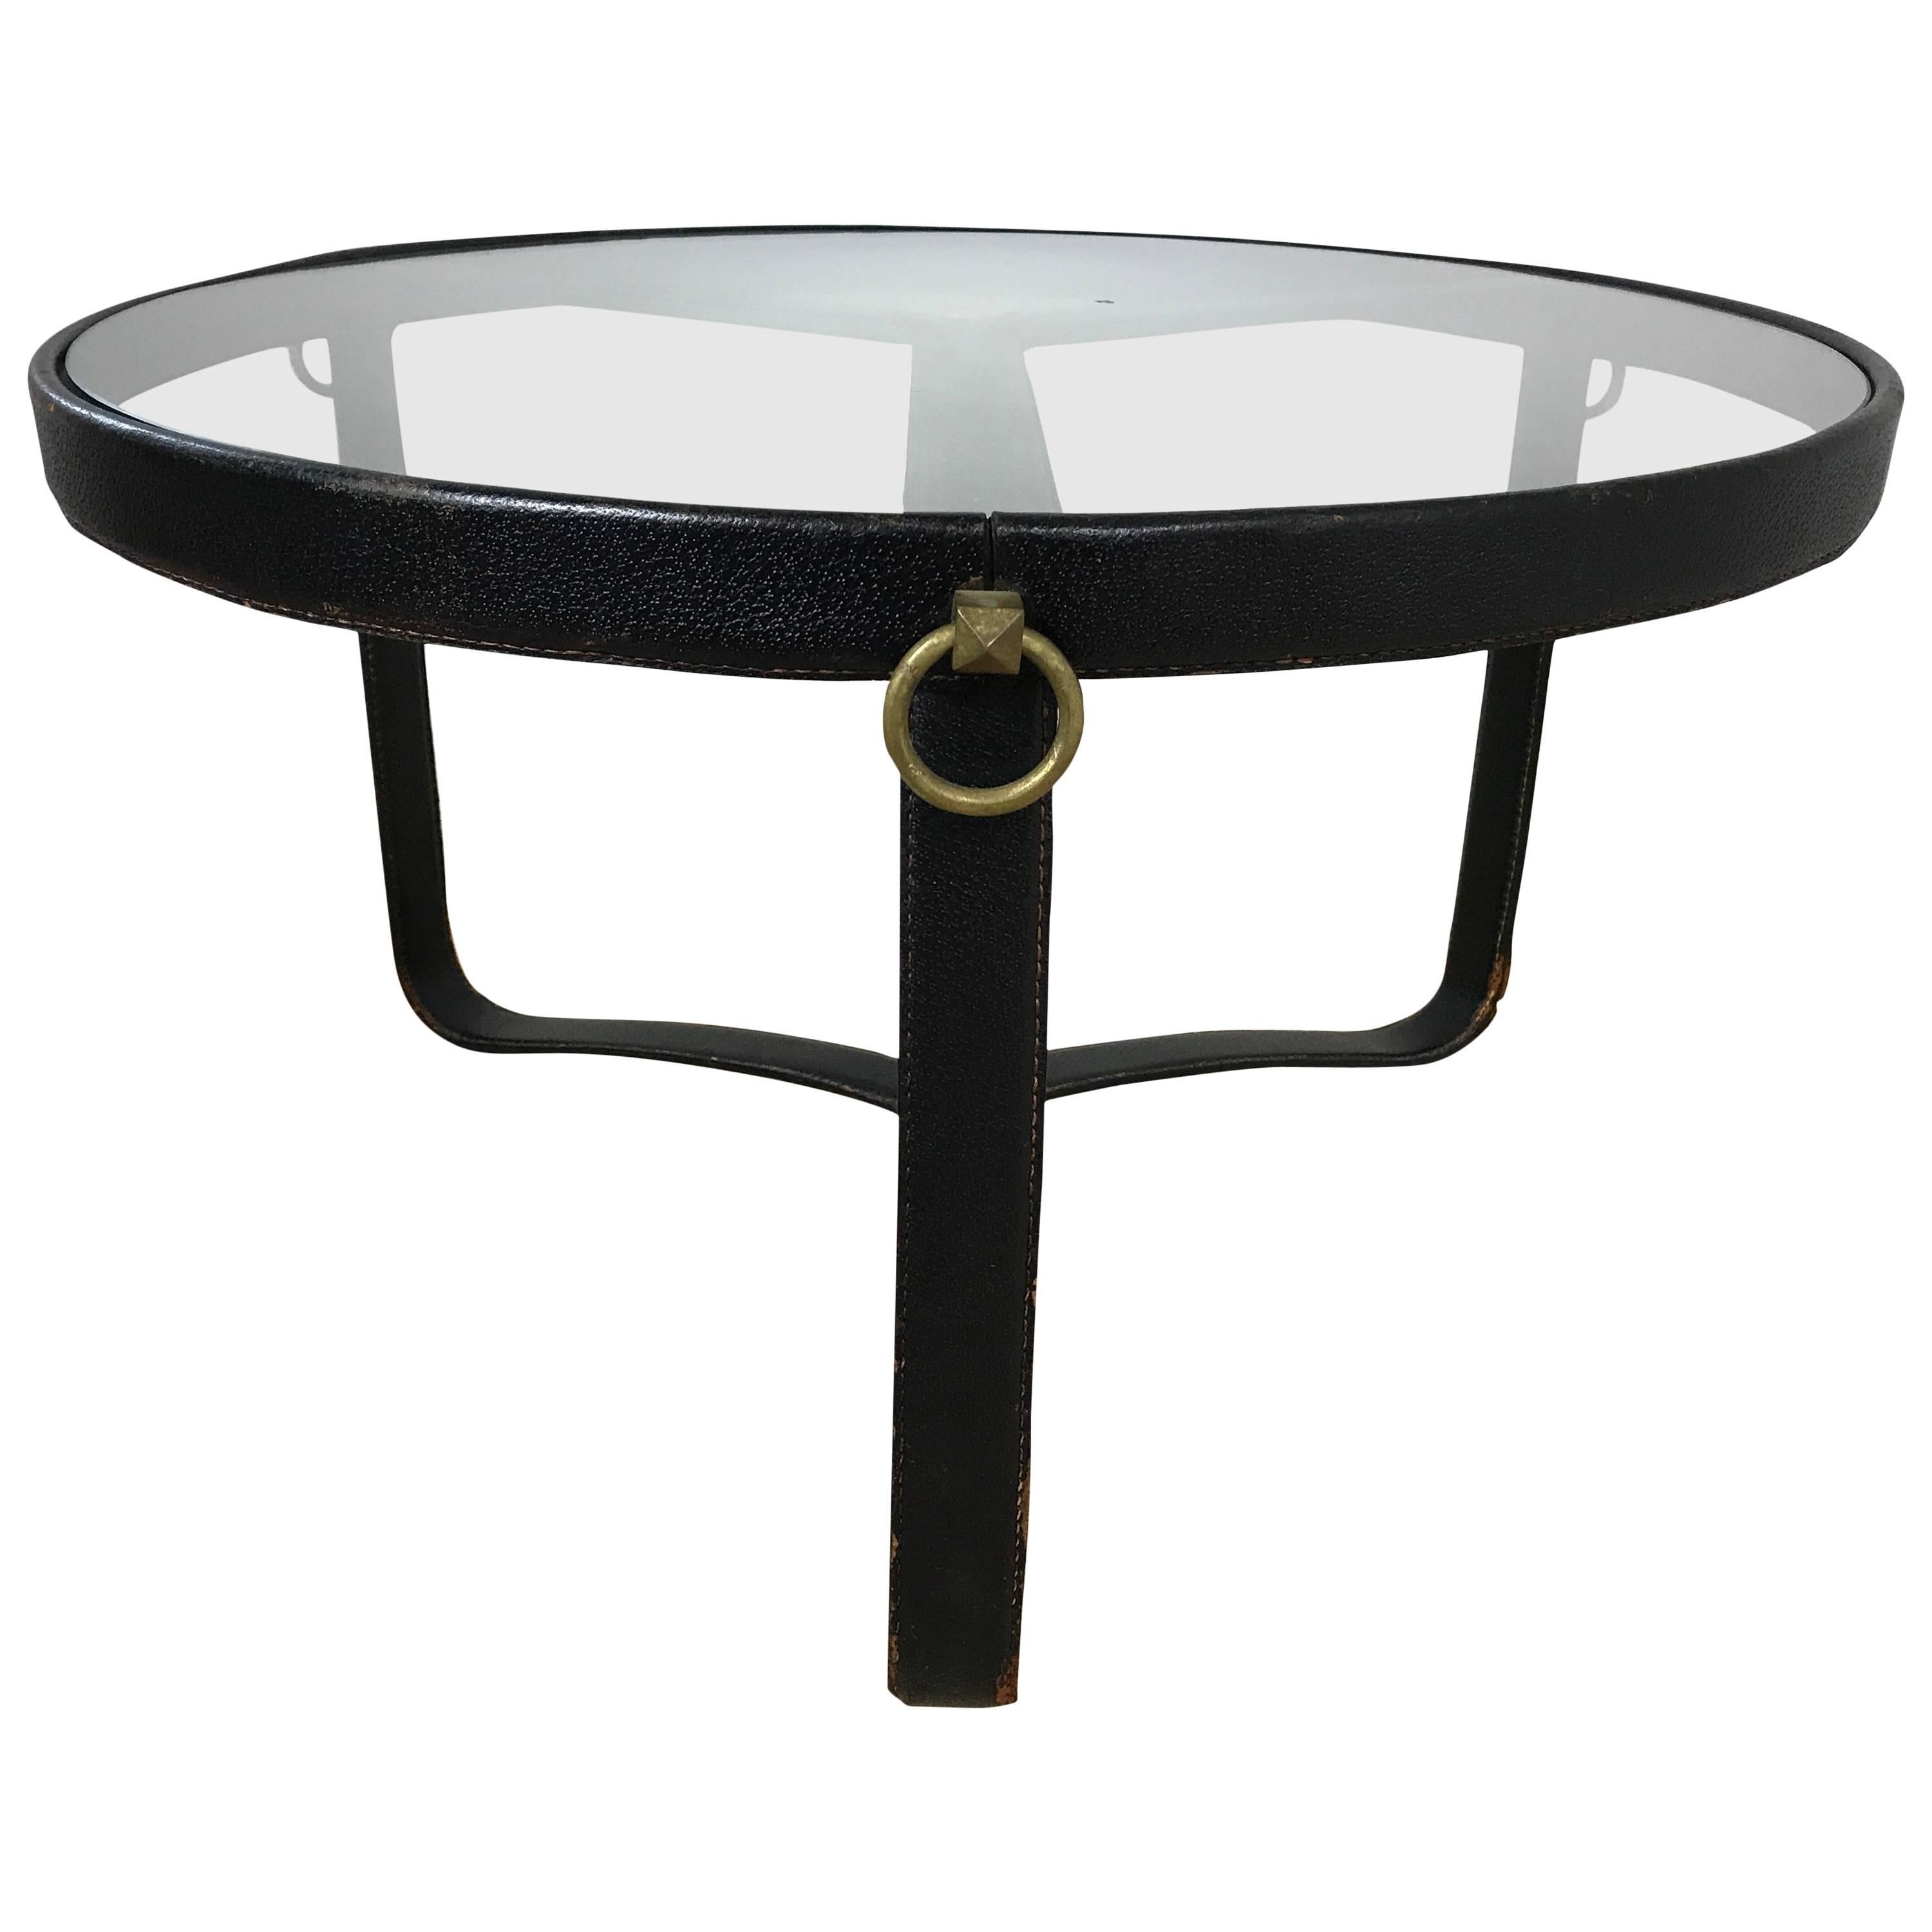 Early and original Jacques Adnet stitched black leather cocktail table with tripod base and brass hardware accents. Original glass top.